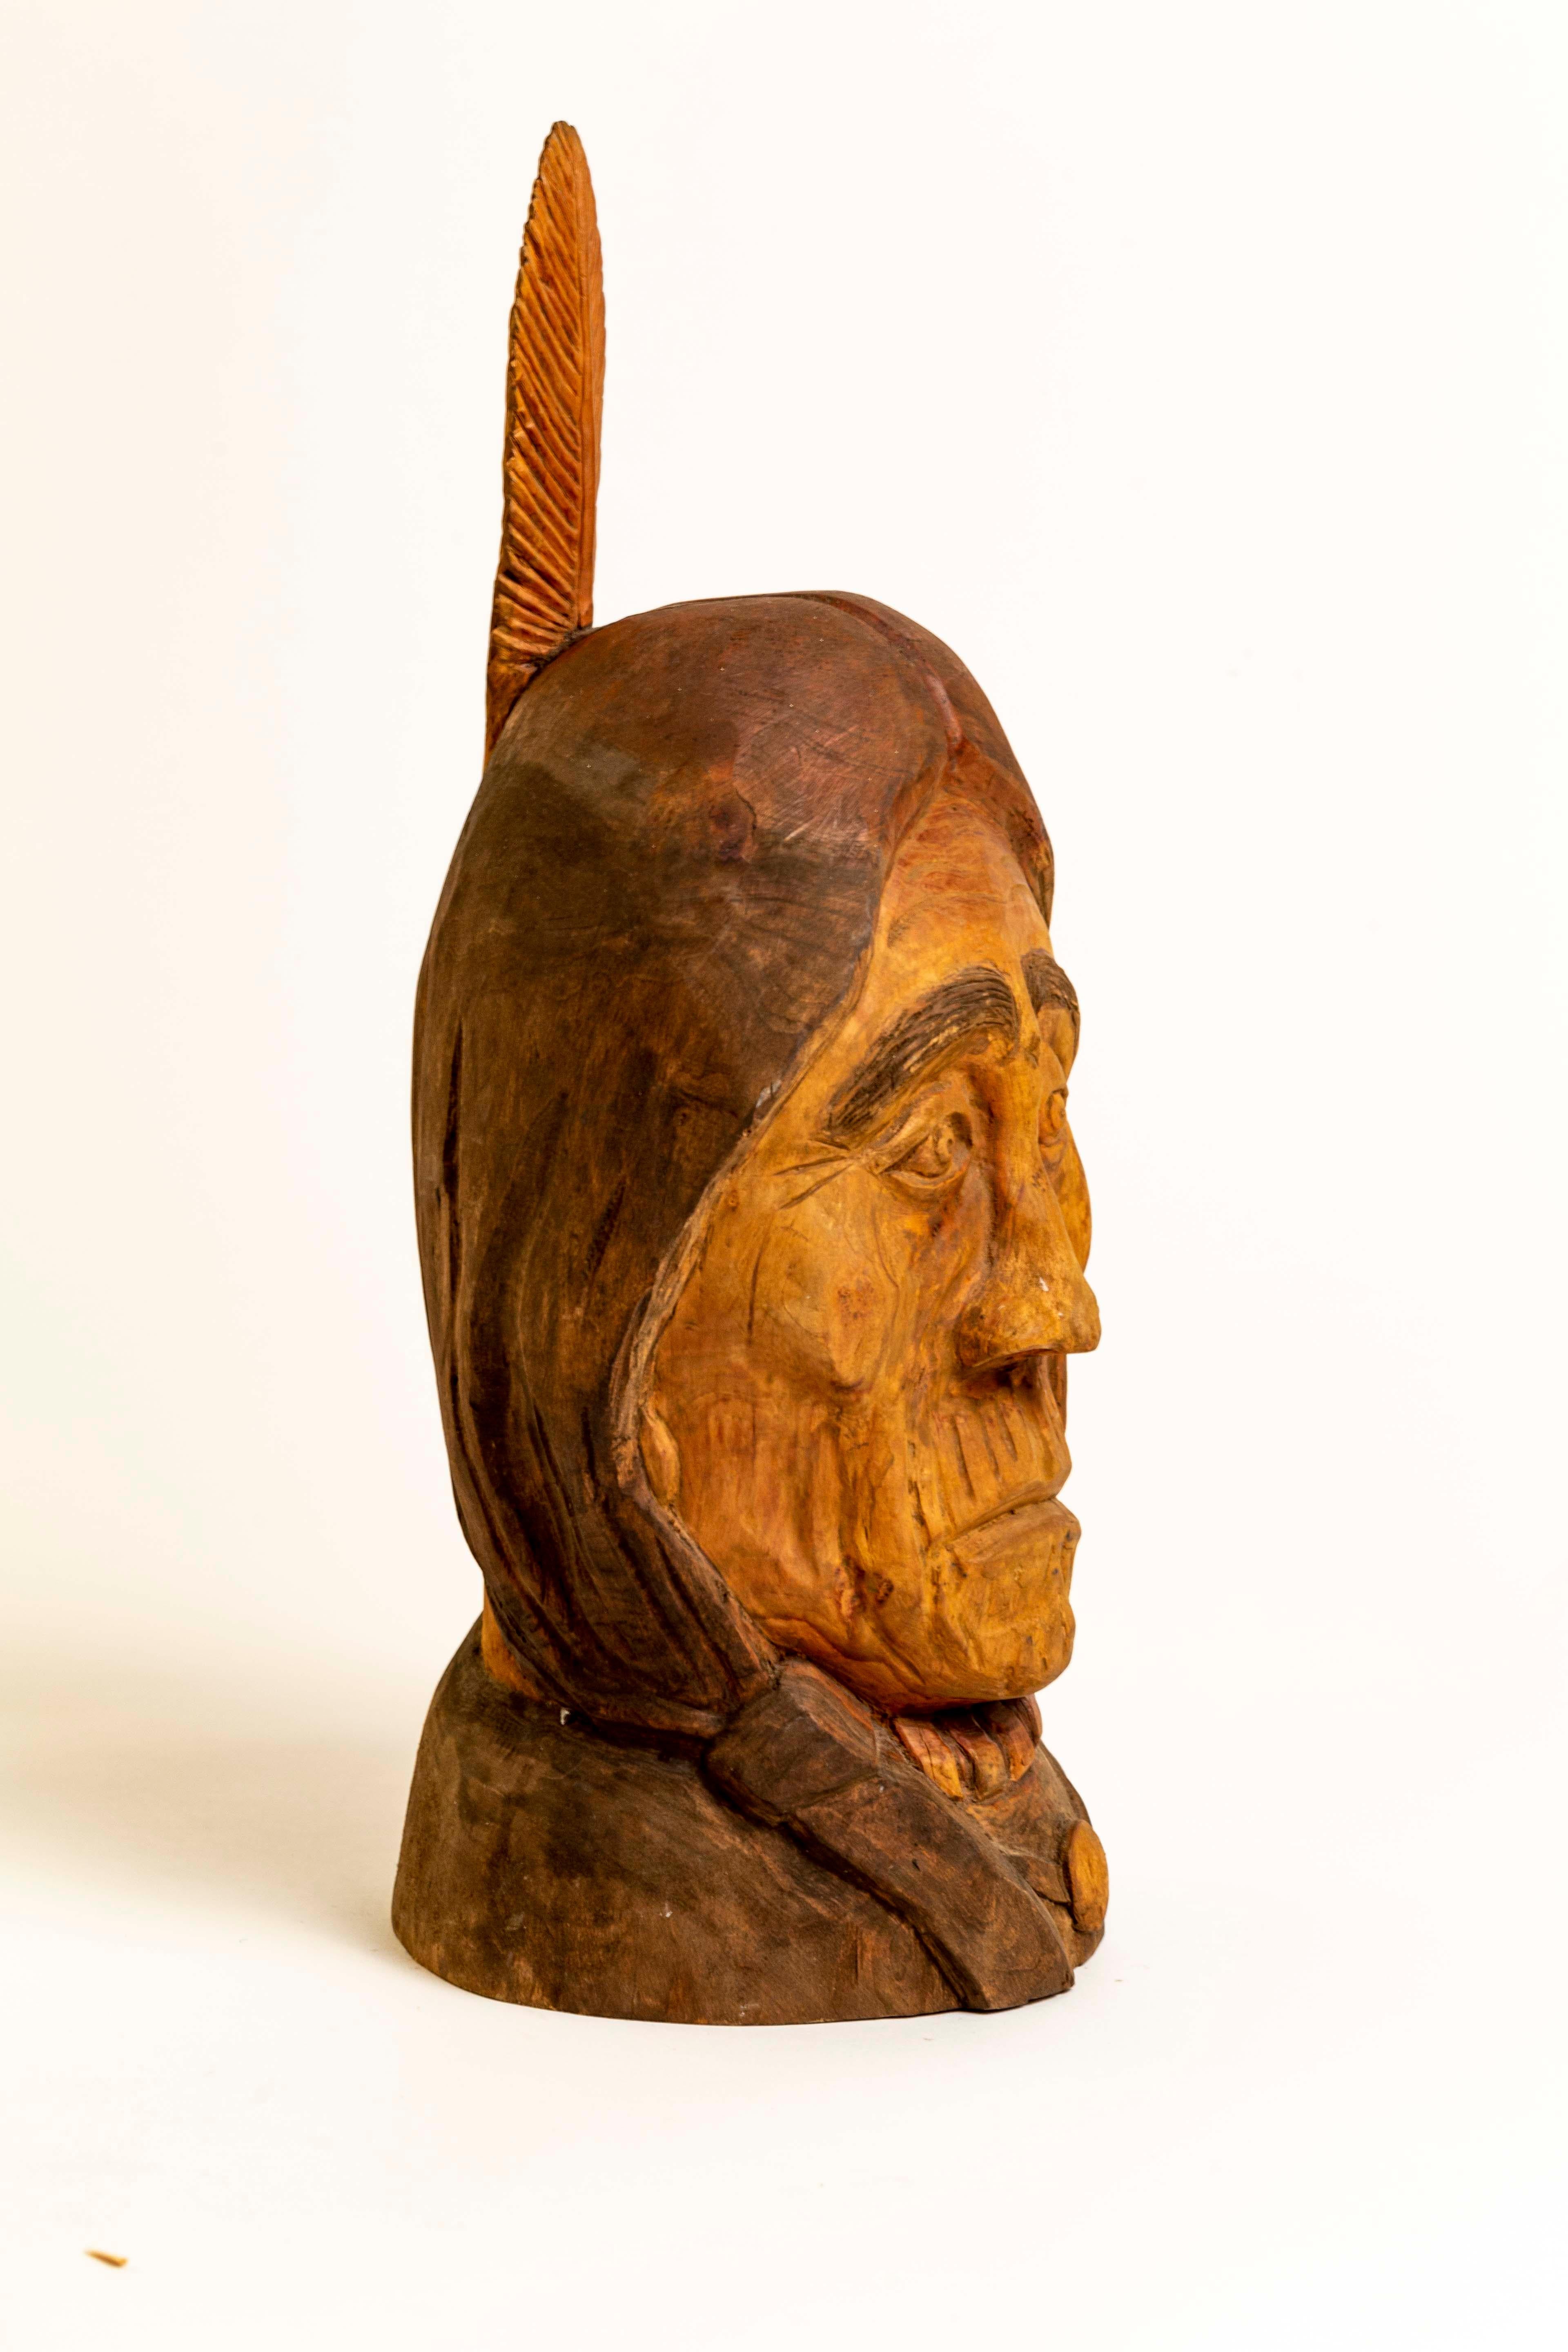 native american wood carvings for sale